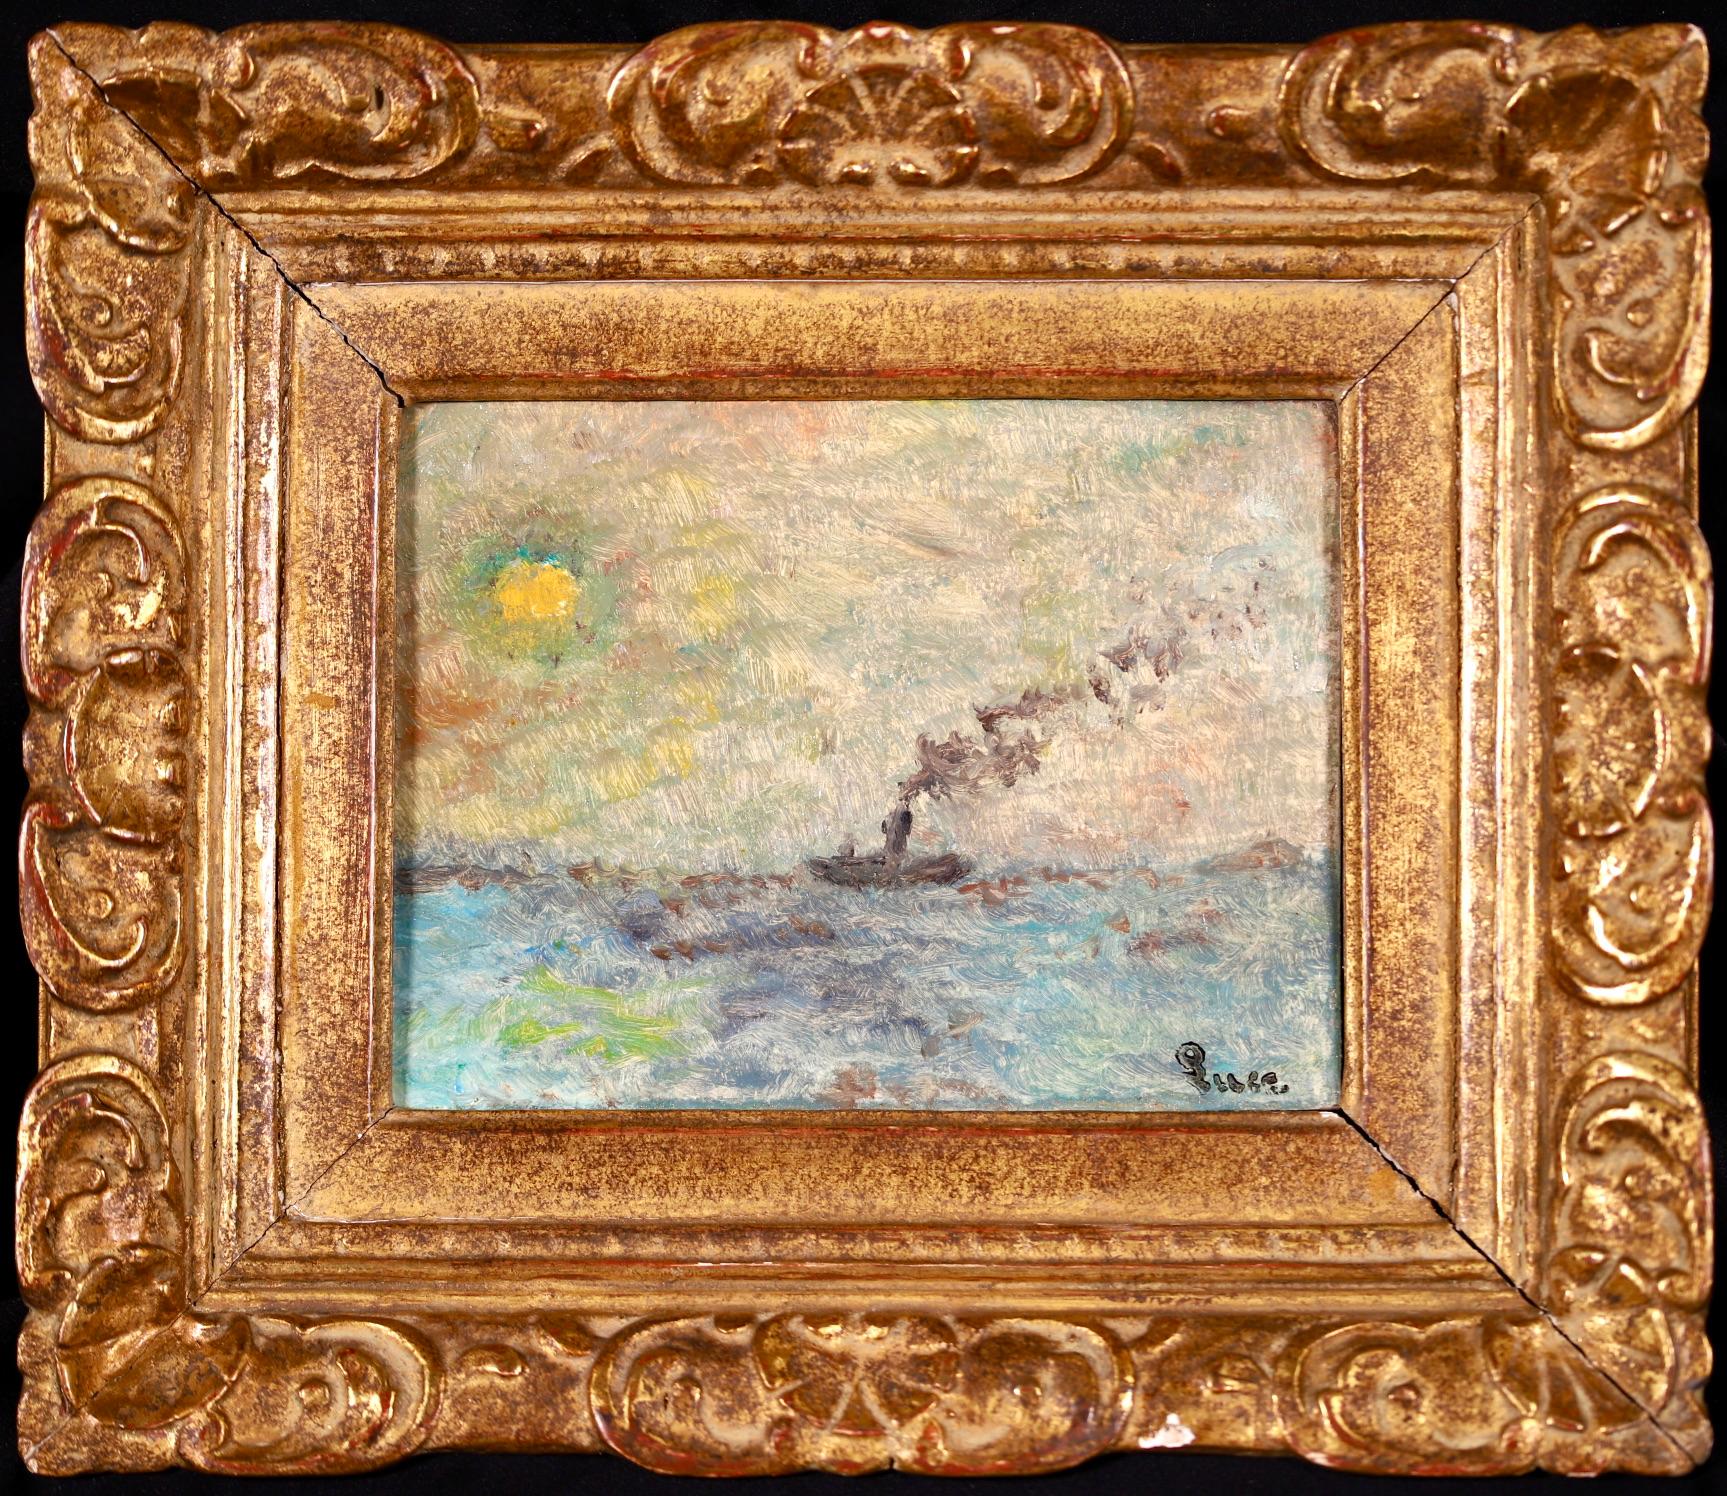 Steamer at Sunset - Impressionist Oil, Boat in Seascape by Maximillien Luce 3